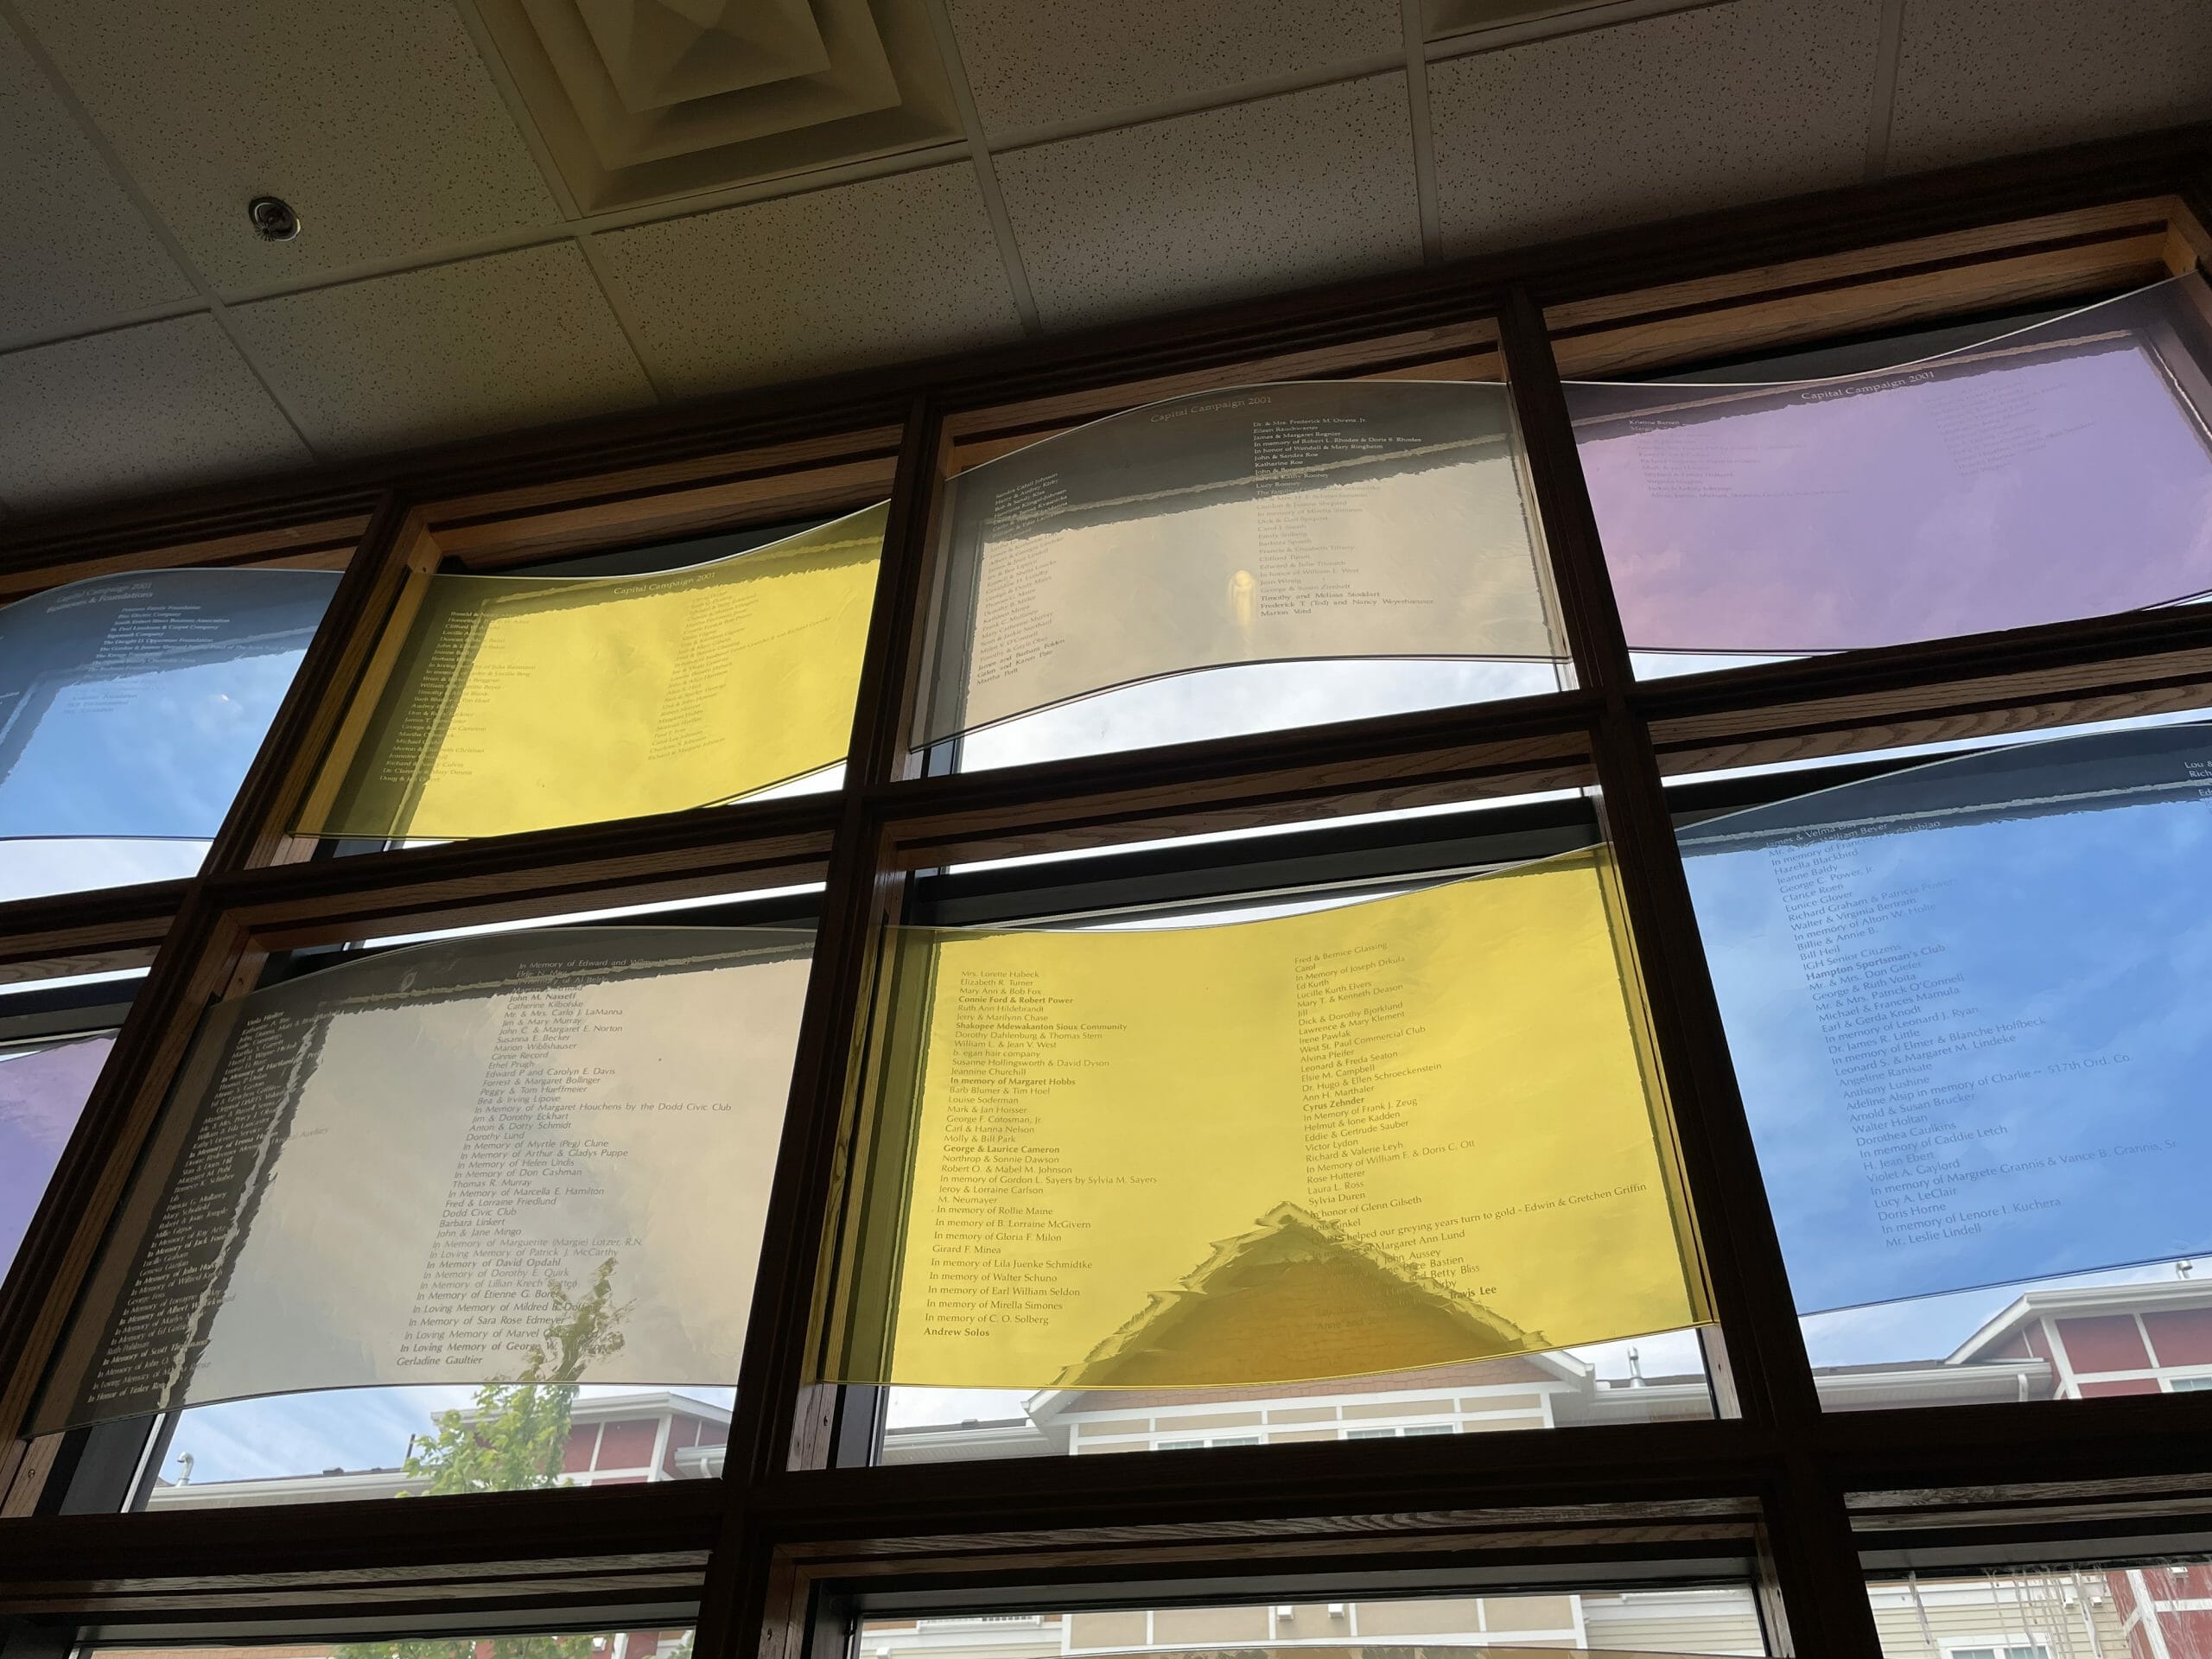 Windows in the Lindell Library showing the names of everyone in the DARTS Heritage Society who take joy in giving.